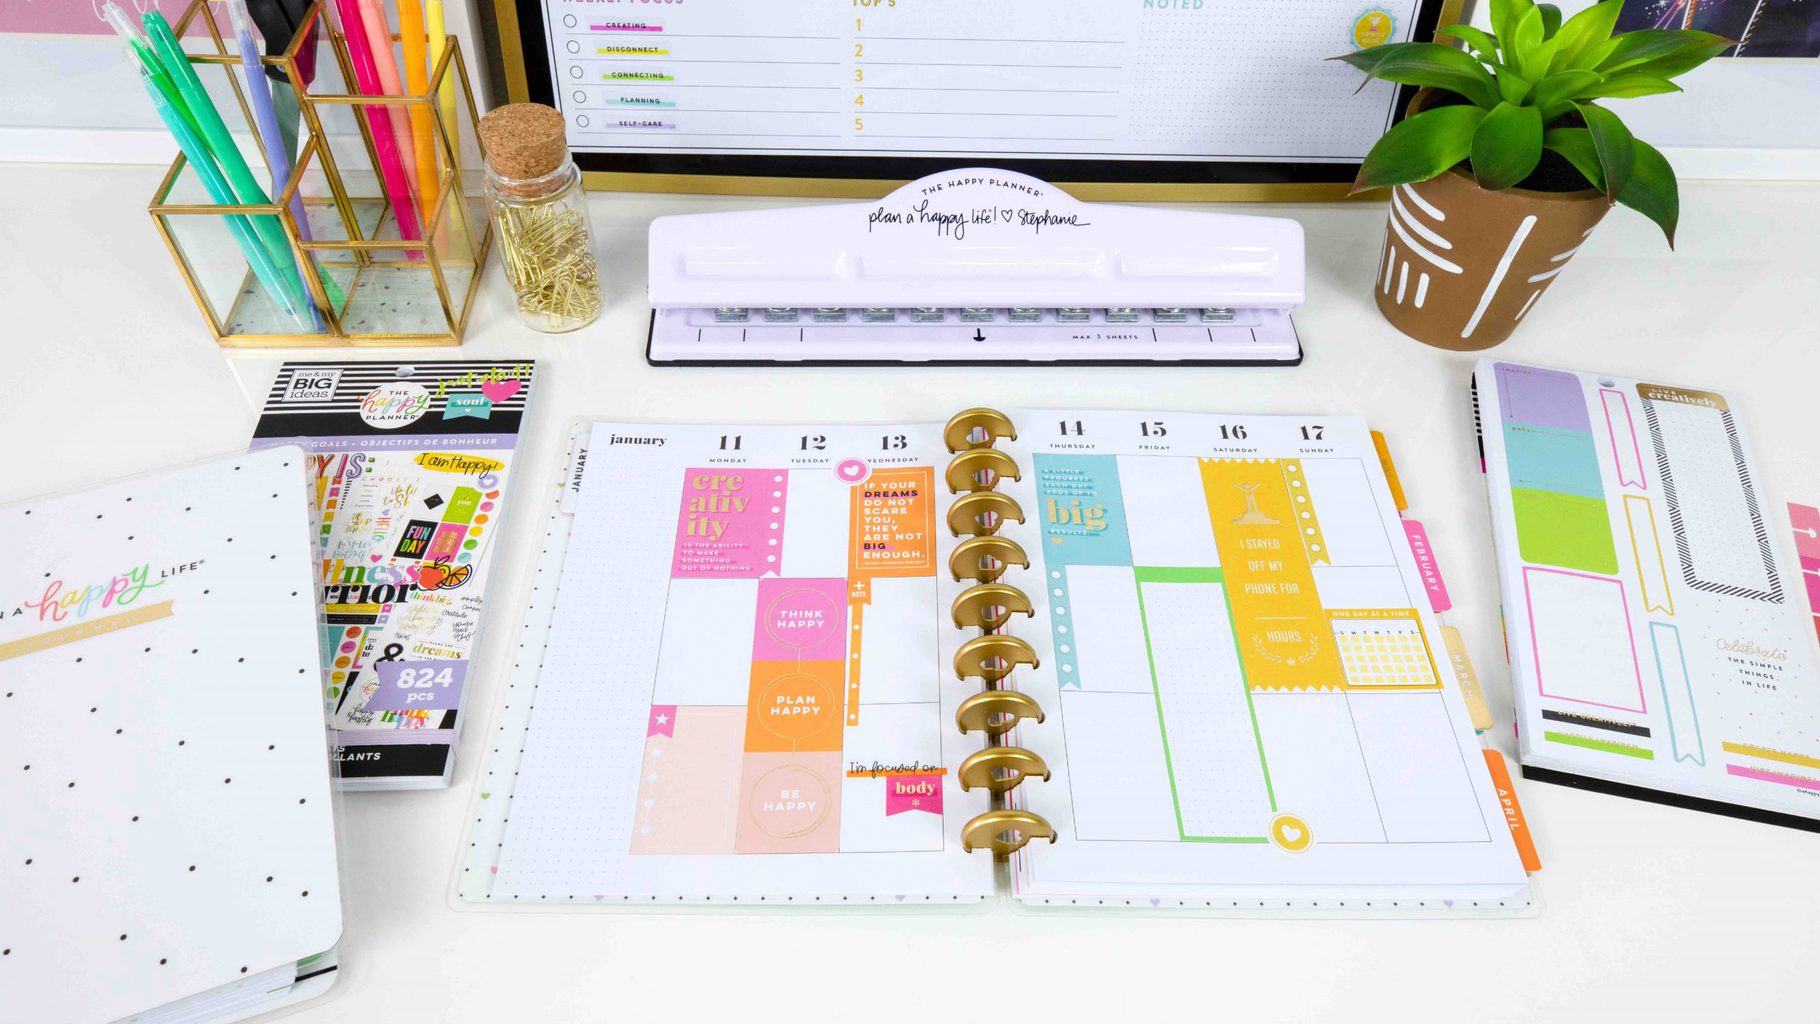 Happy Planner Ideas: How to Start Using a Planner this Year